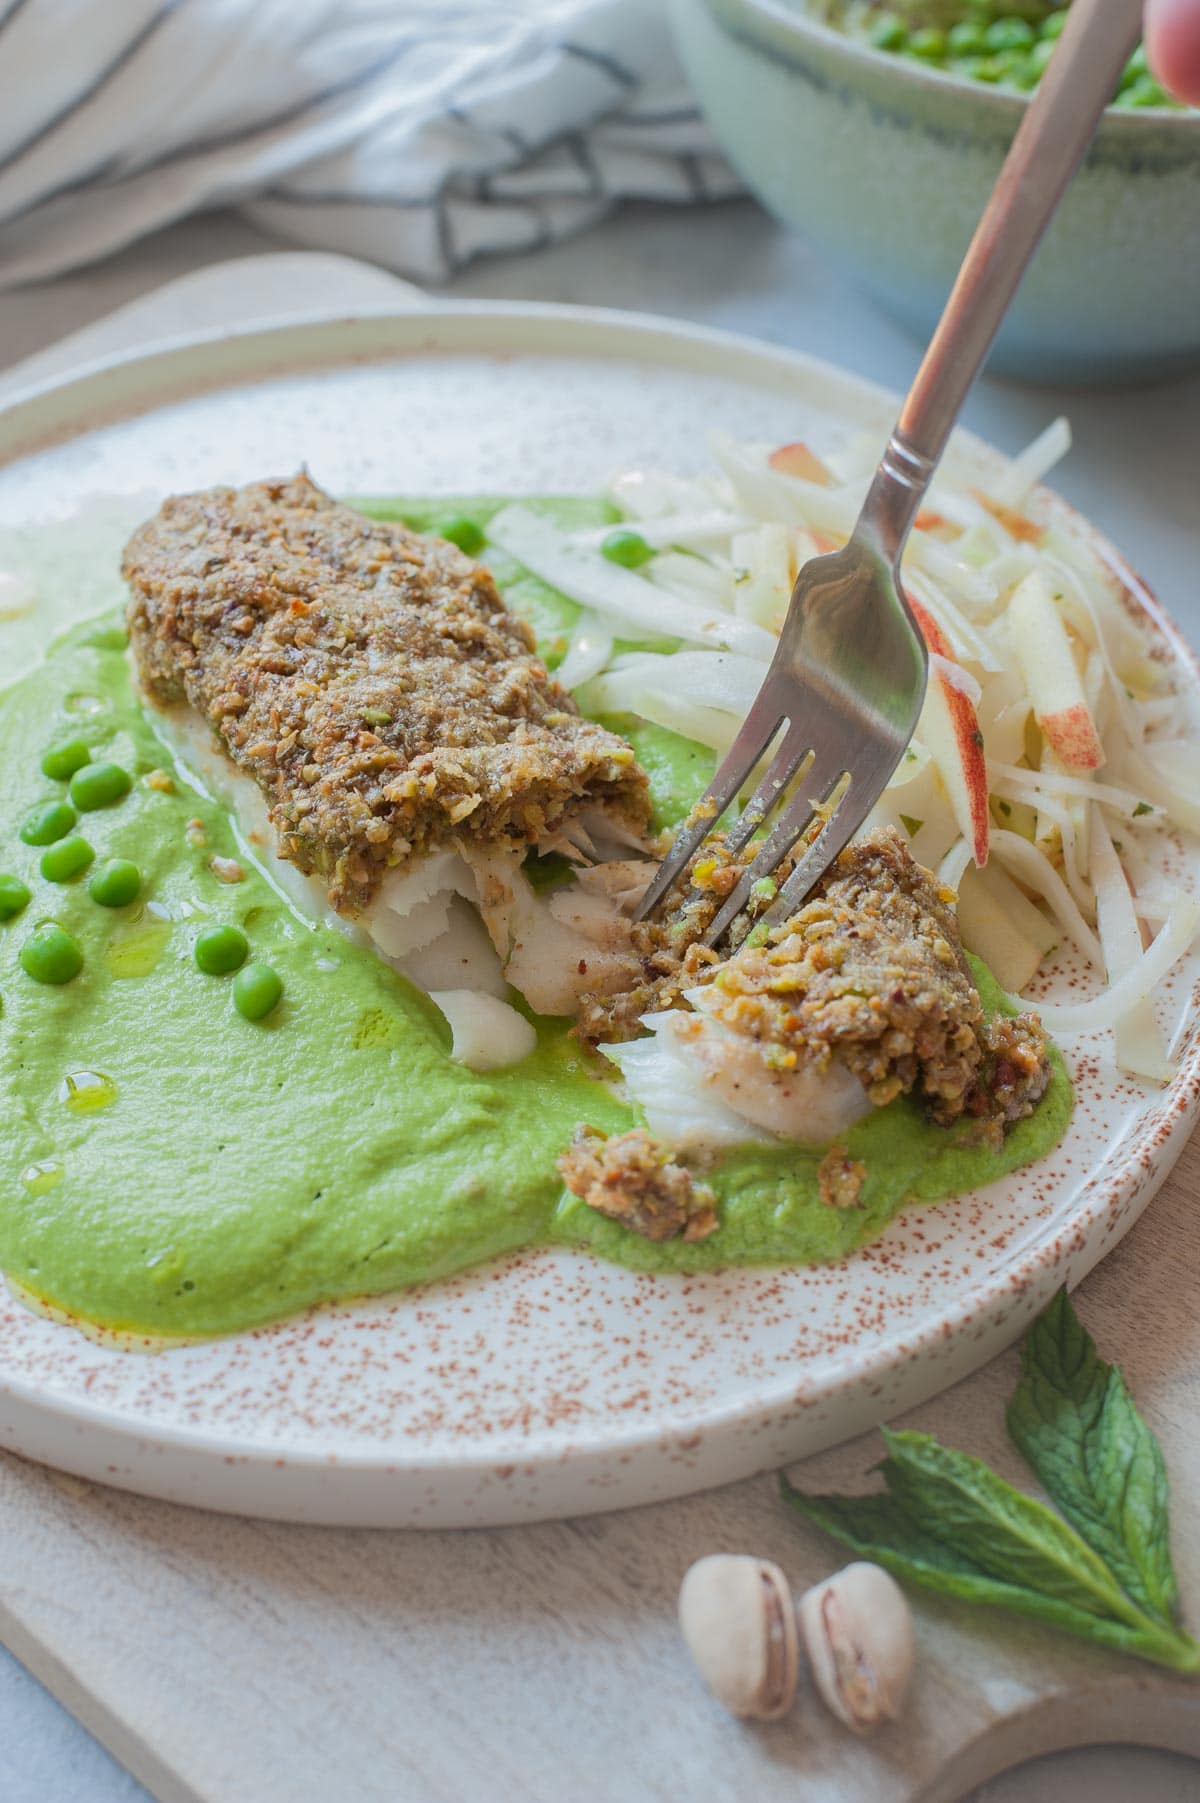 Pistachio crusted fish with pea puree and kohlrabi slaw on a white plate.